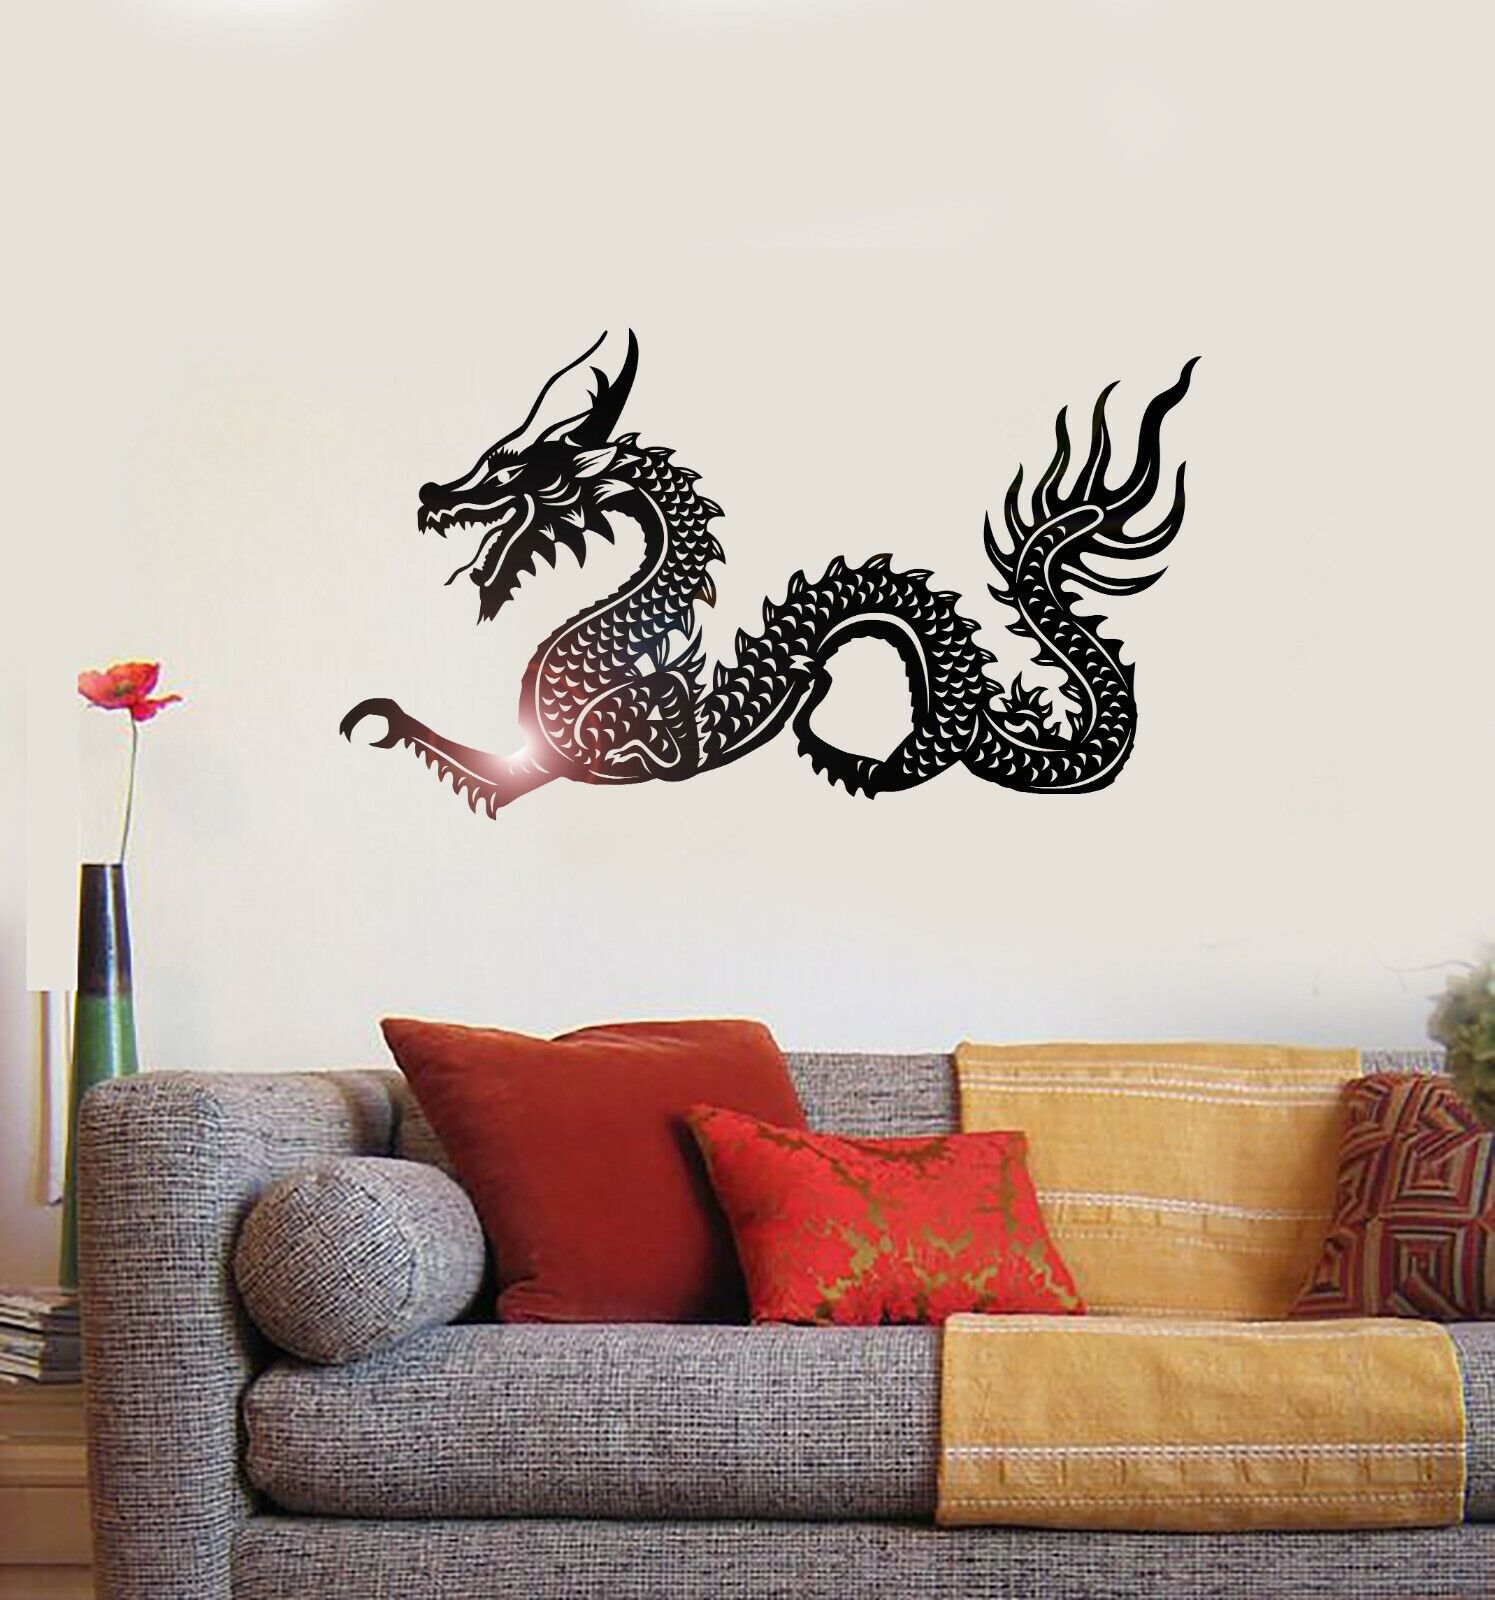 Vinyl Wall Decal Chinese Dragon Asian Decor Oriental Style Sticker (ig4257)